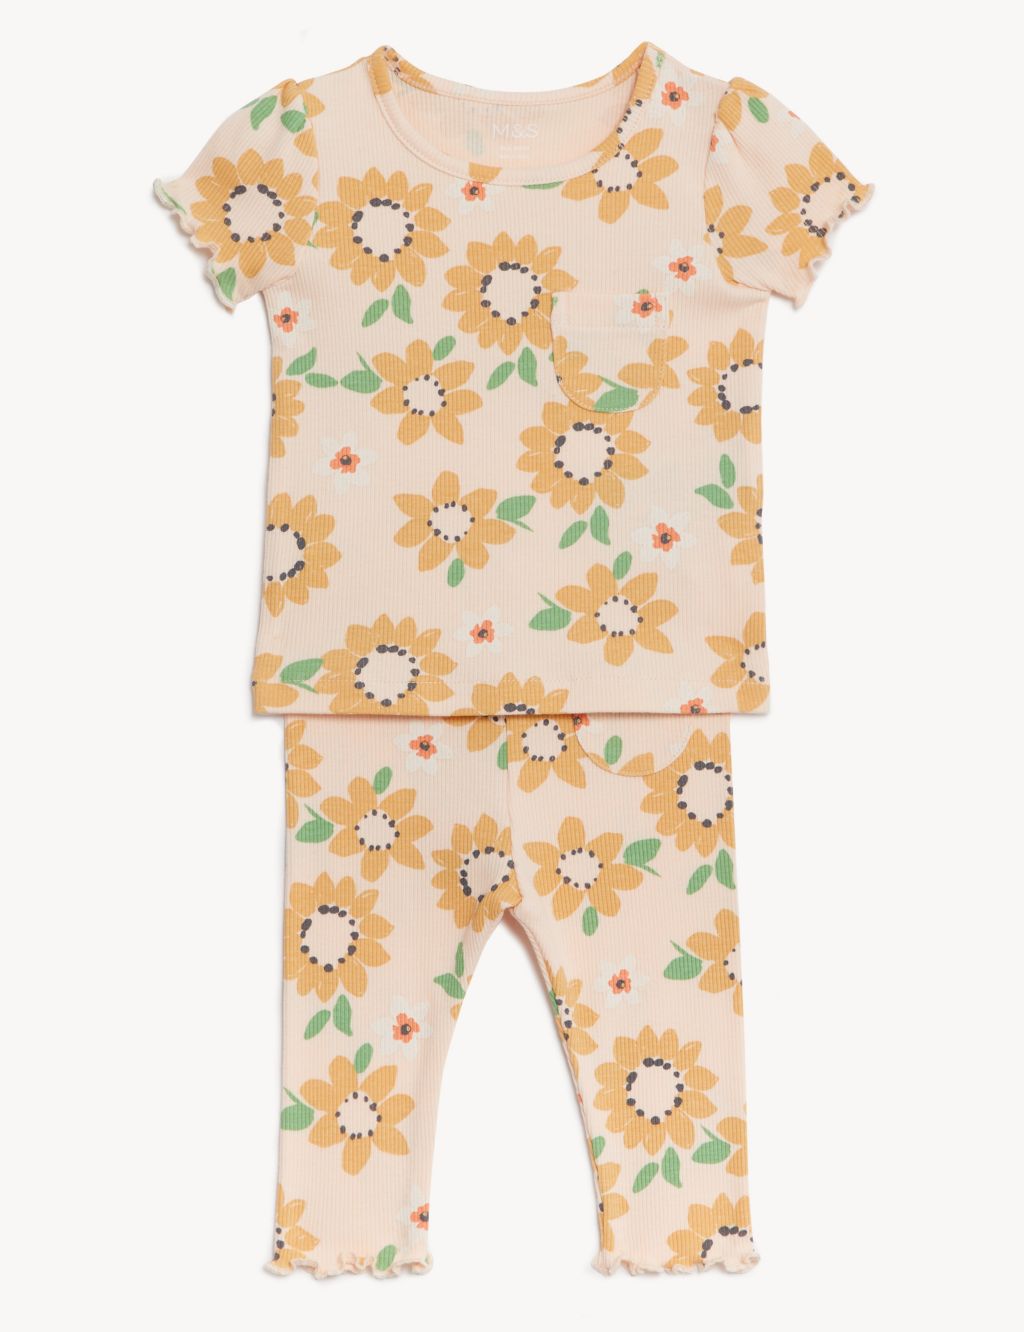 2pc Cotton Rich Sunflower Outfit (0-3 Yrs) image 1